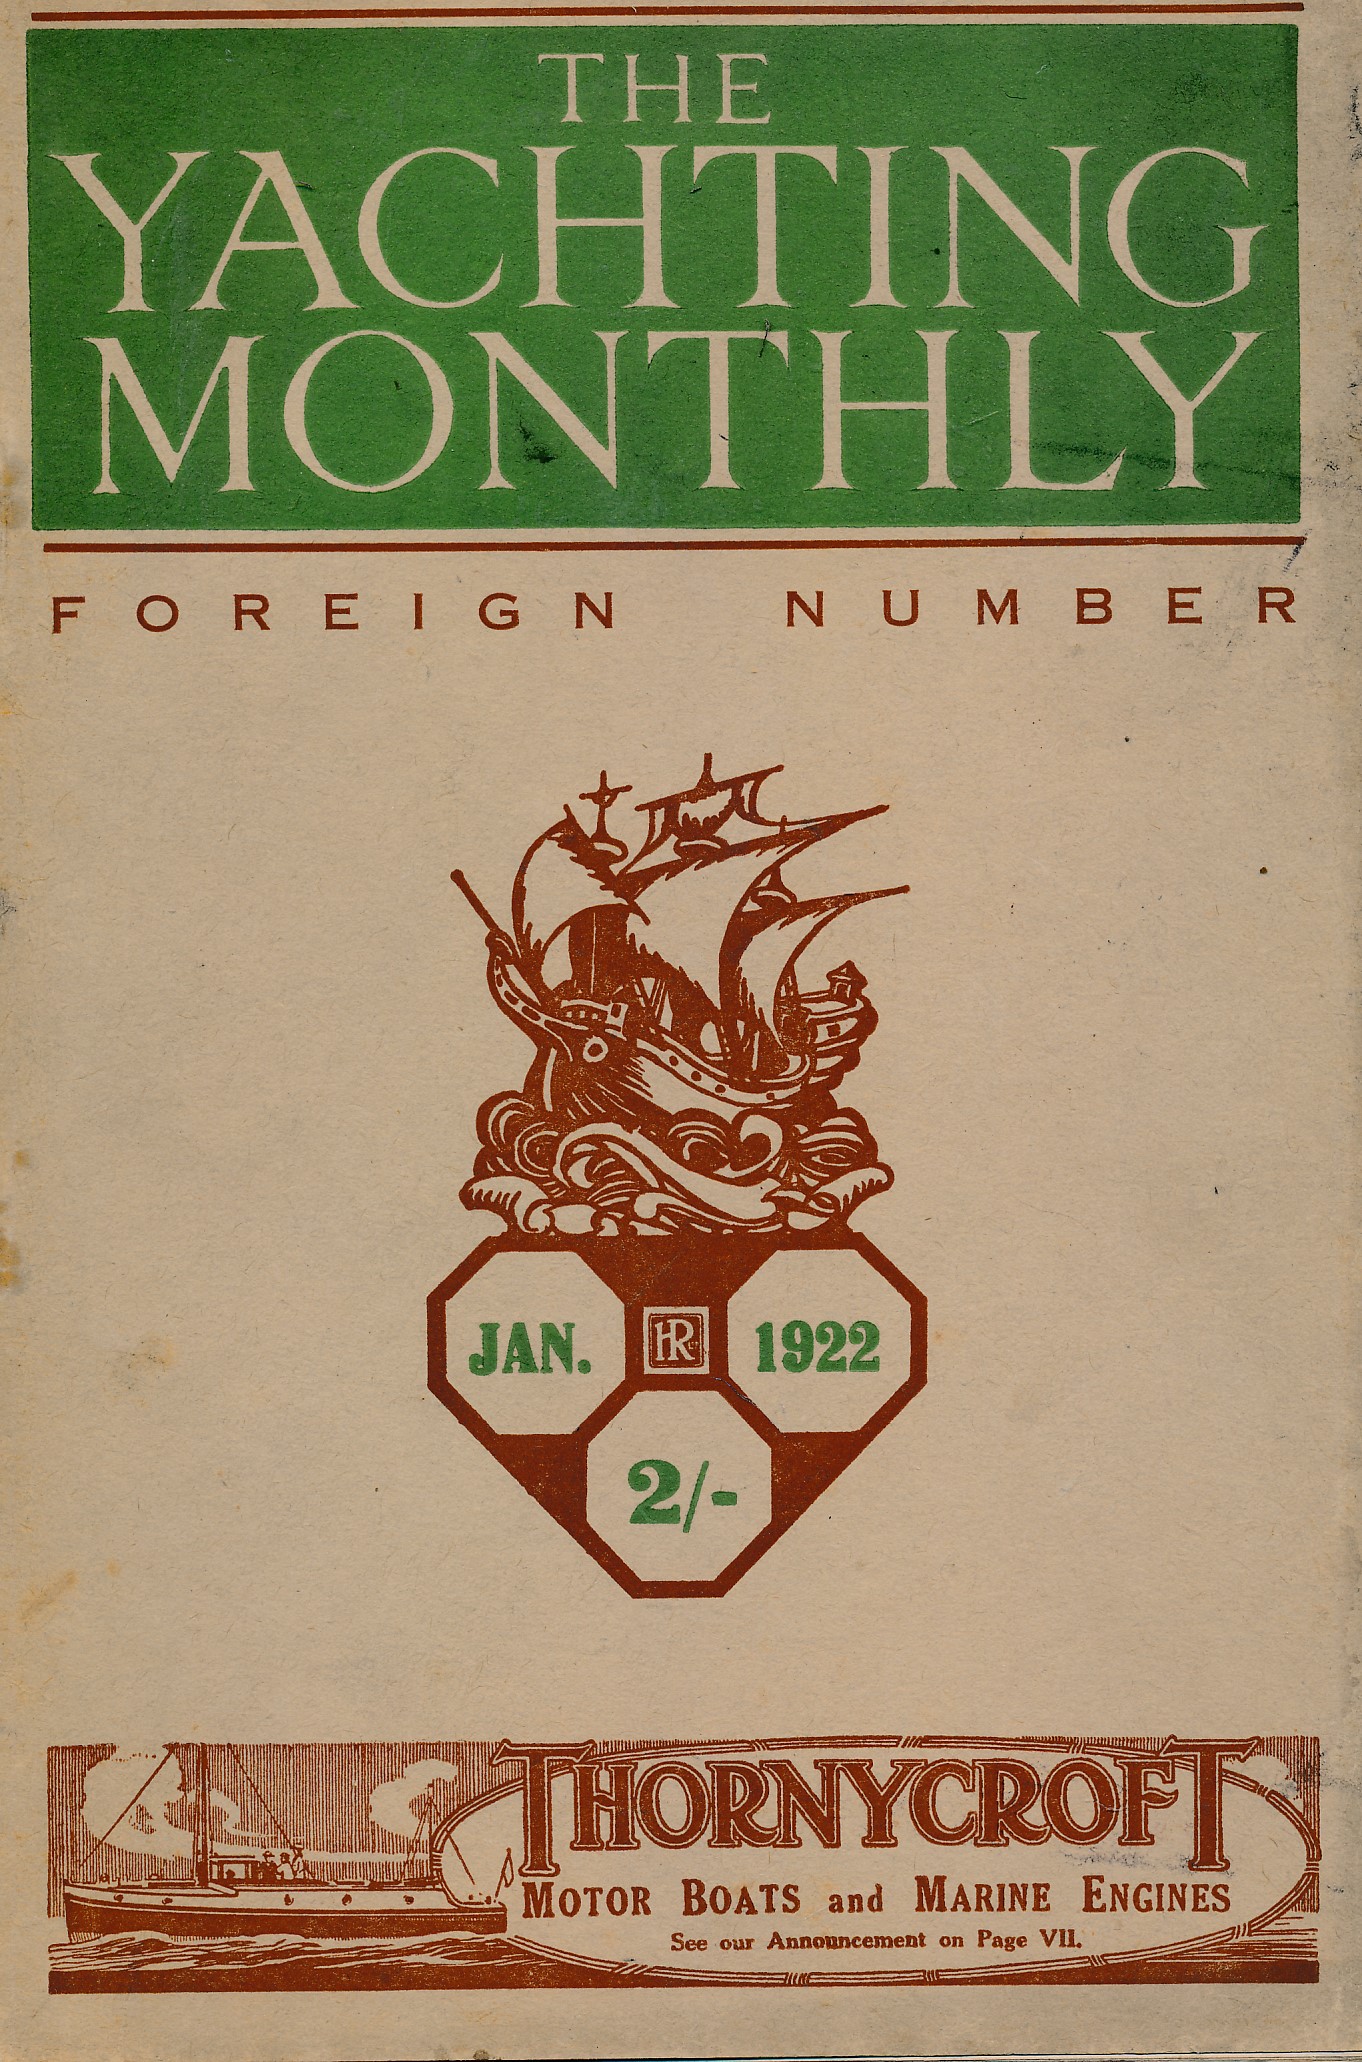 The Yachting Monthly.  Volume 189.- Vol. XXXII.  January, 1922.